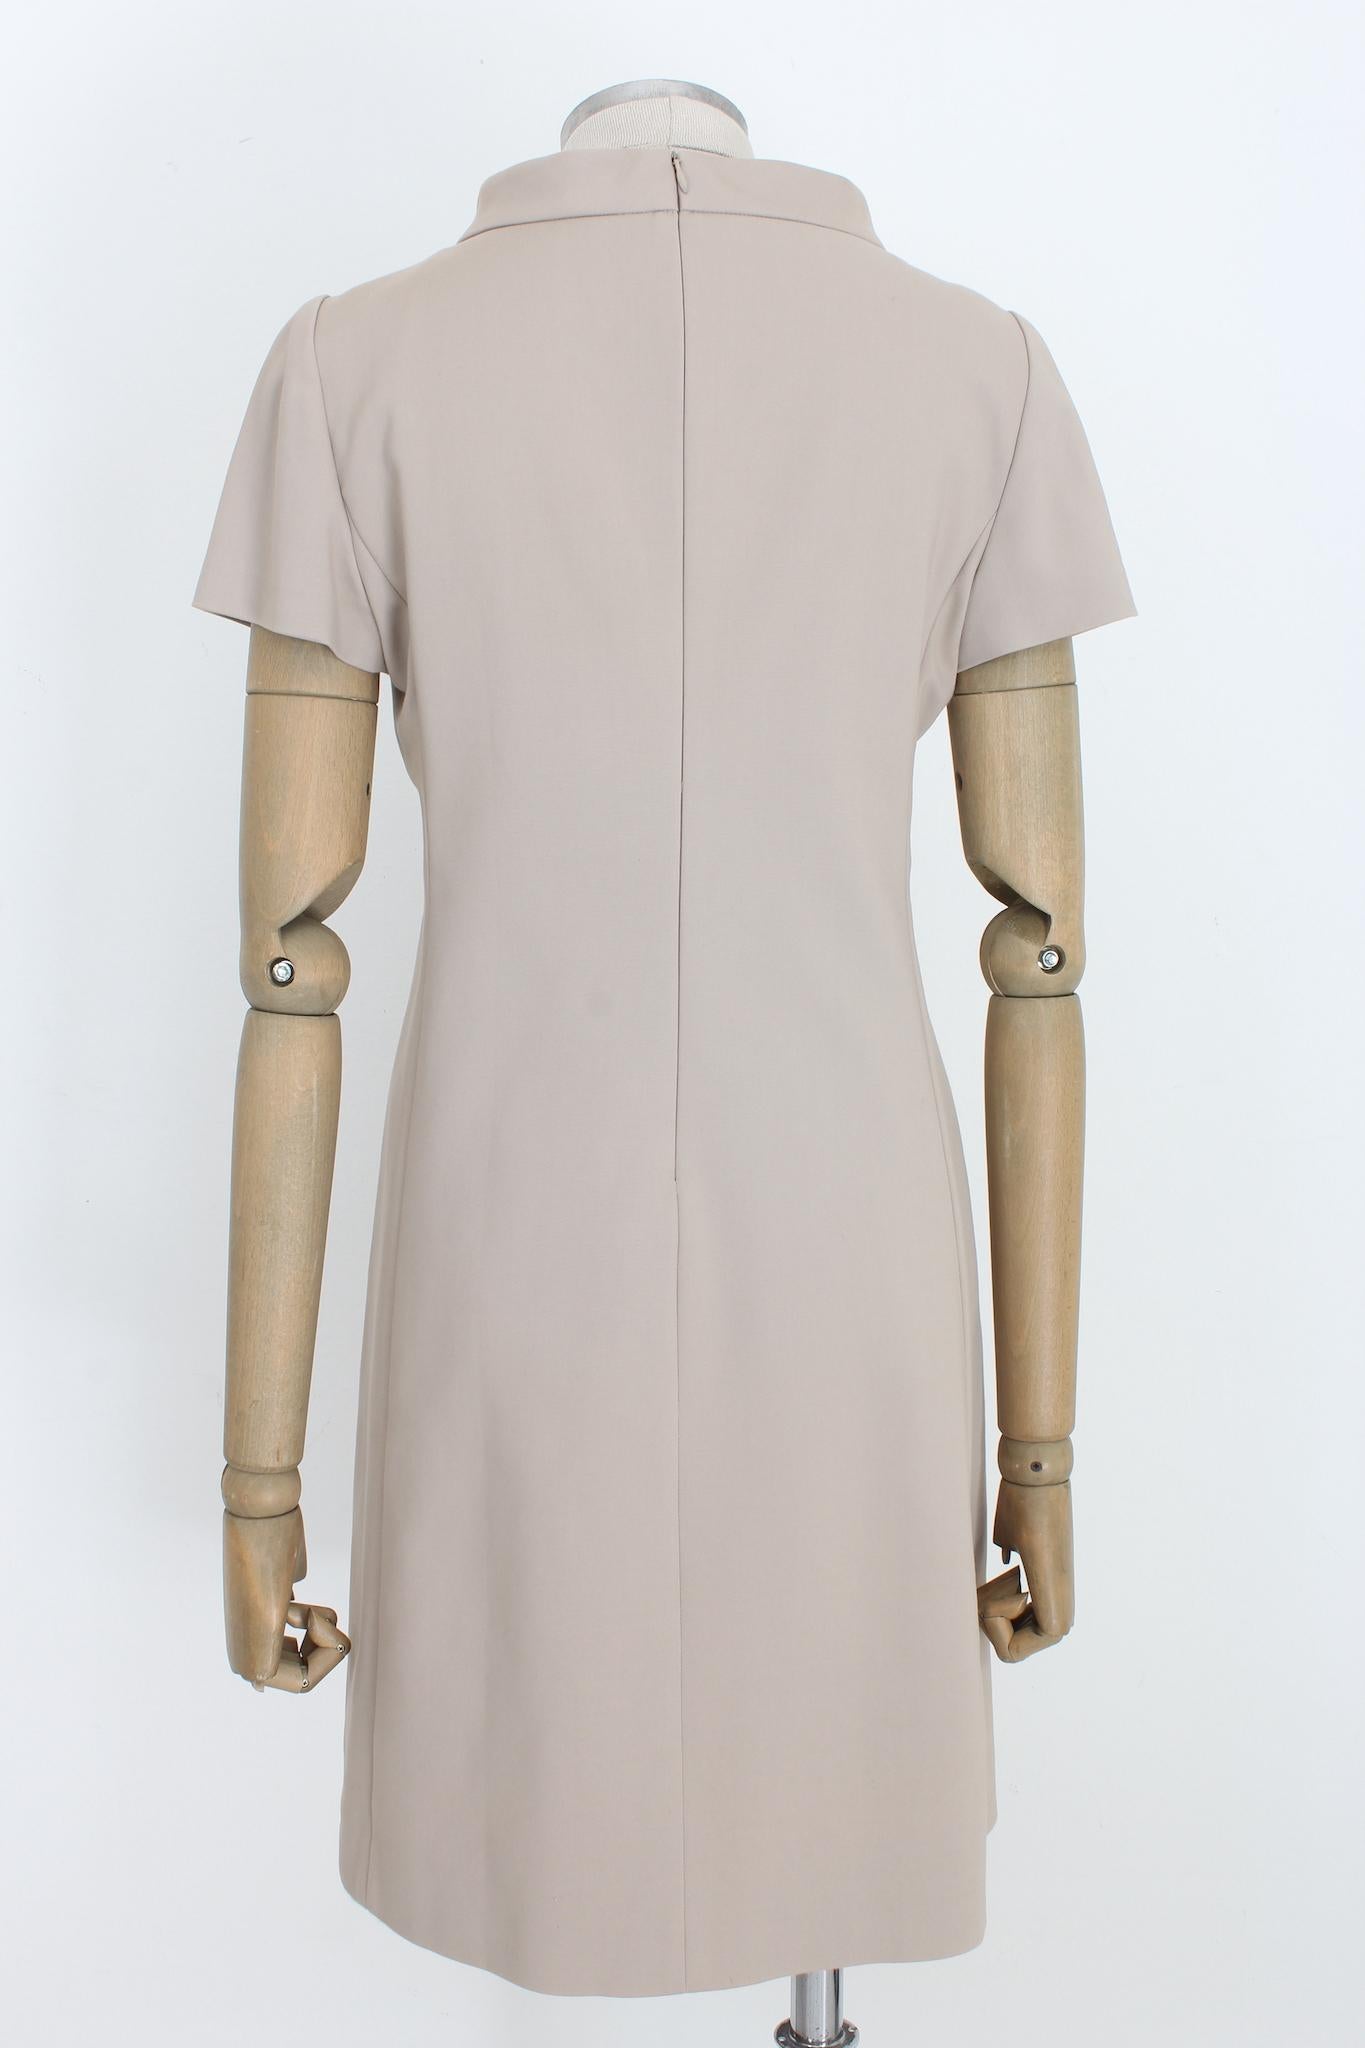 Moschino Beige Cotton Sheath Dress 2000s In Excellent Condition For Sale In Brindisi, Bt